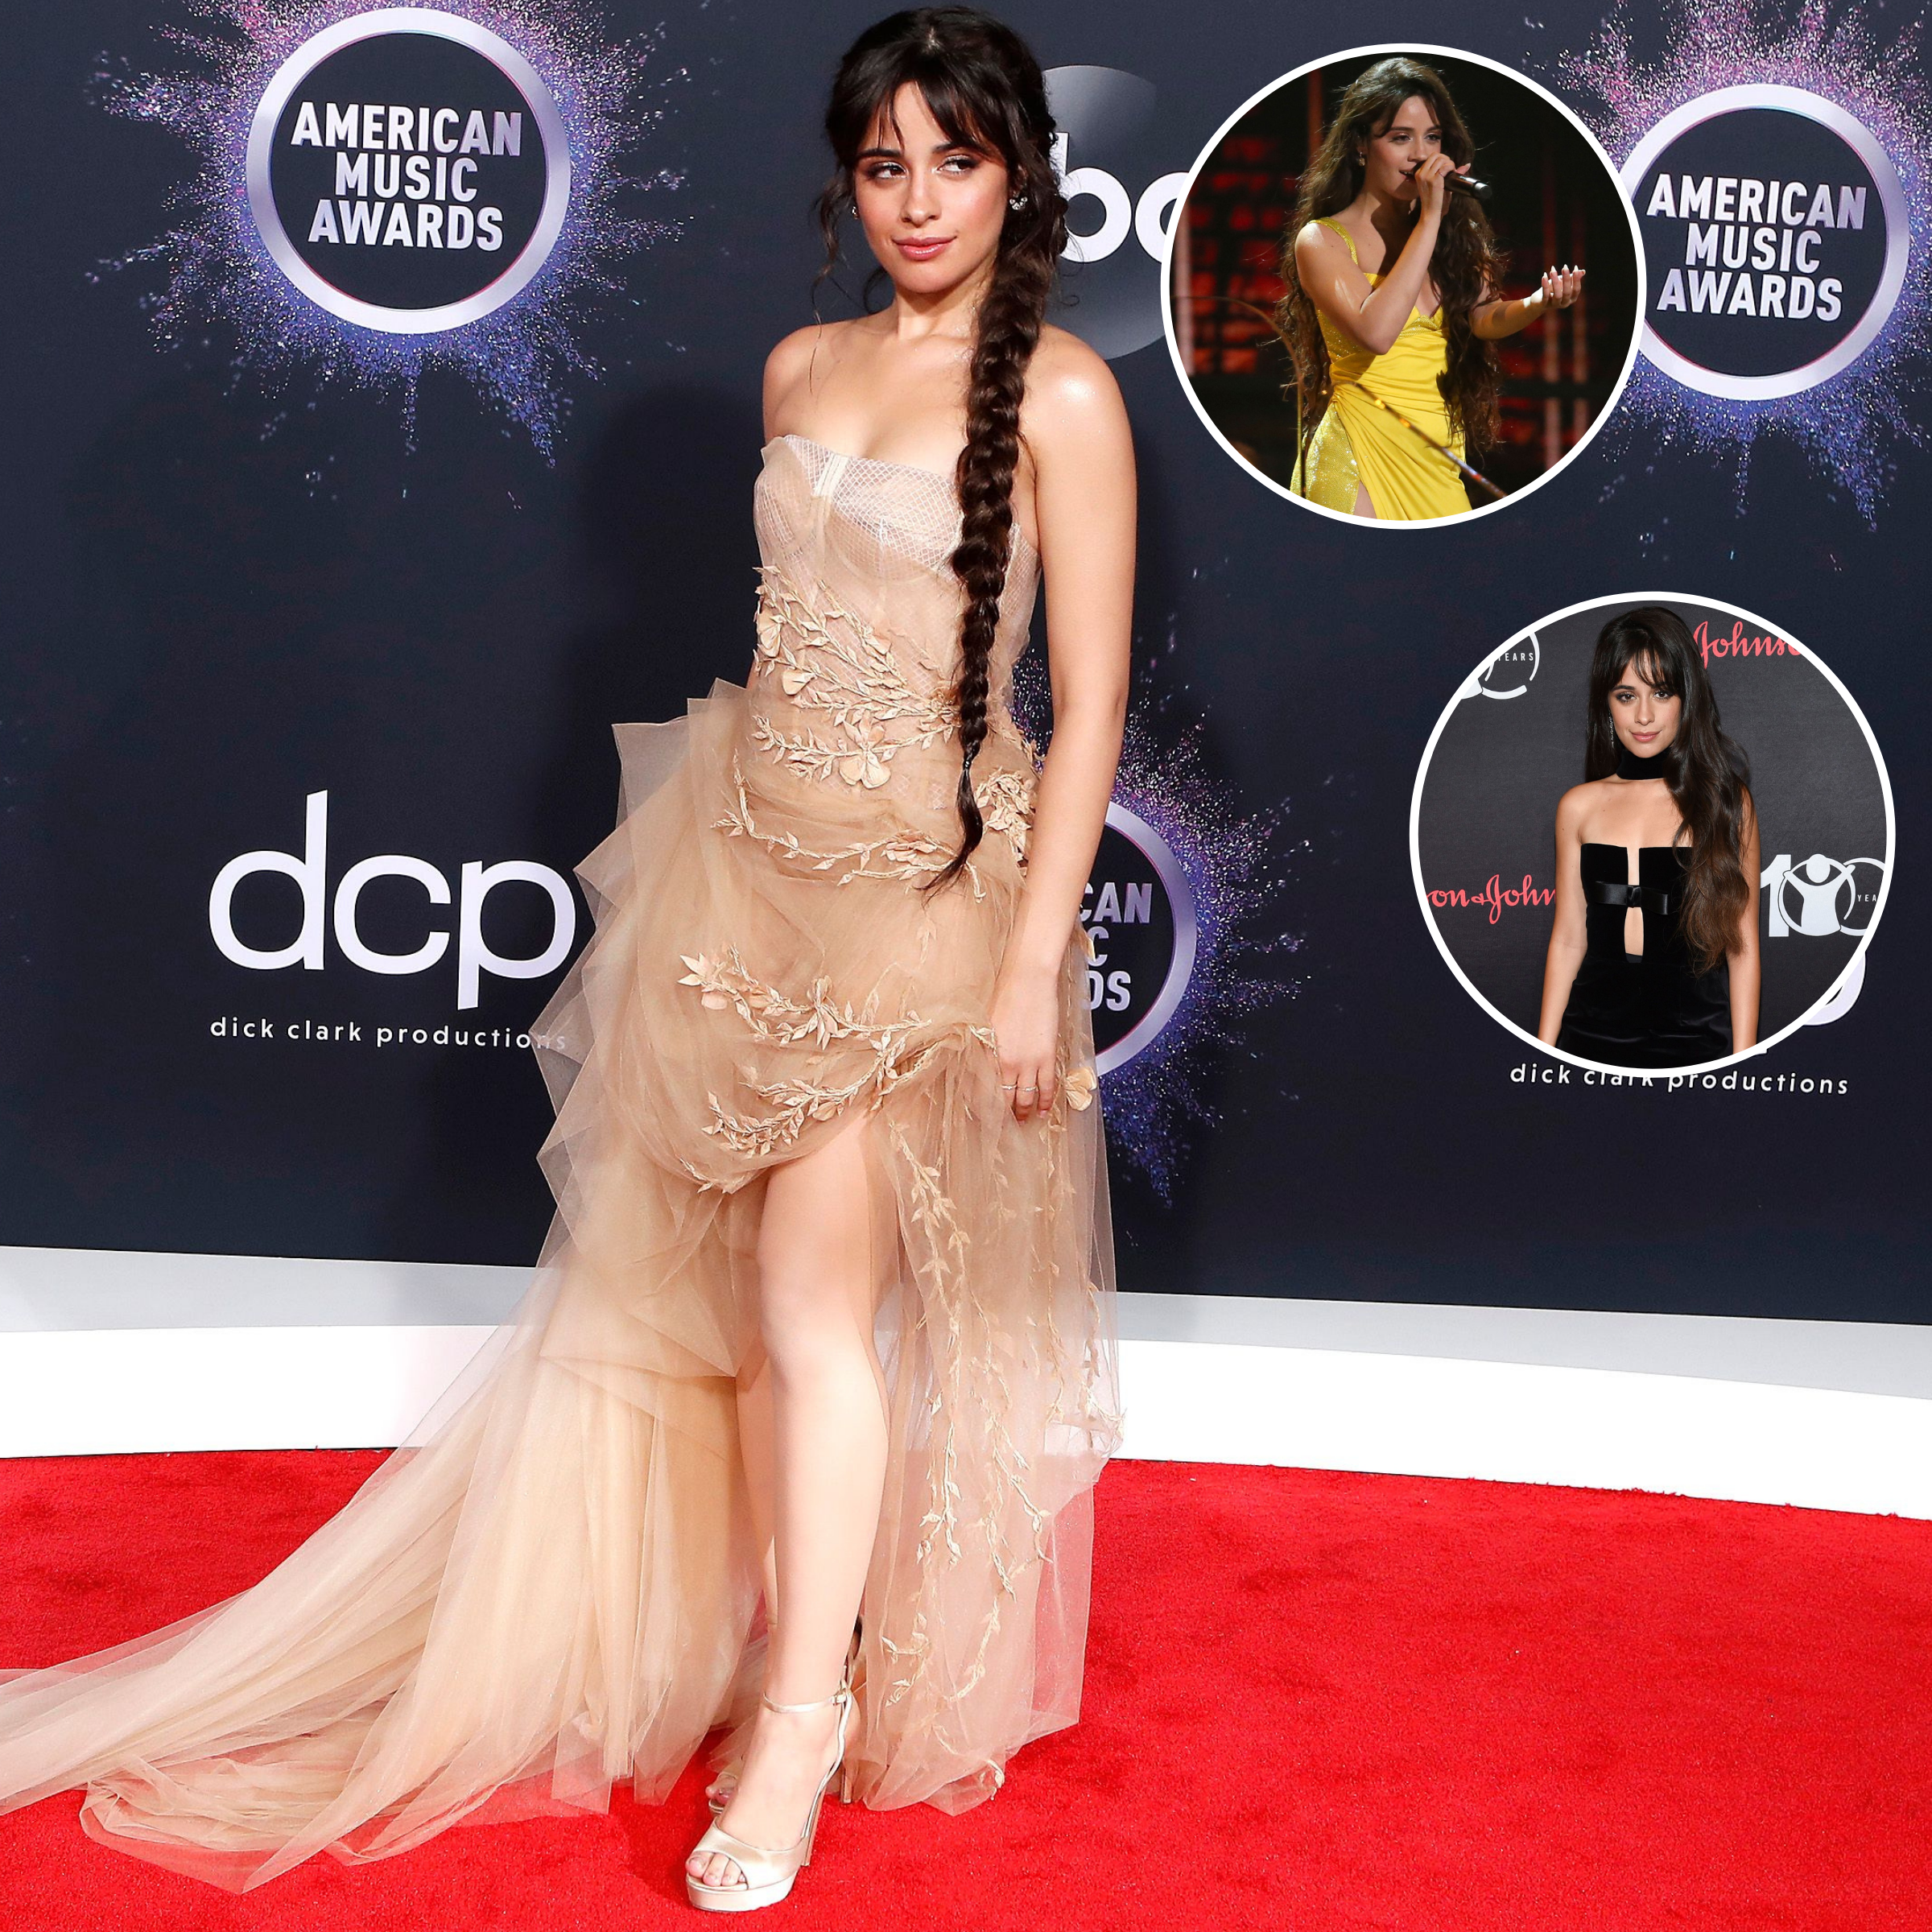 Best Celebrity Red Carpet Fashion Moments of 2021: Pics